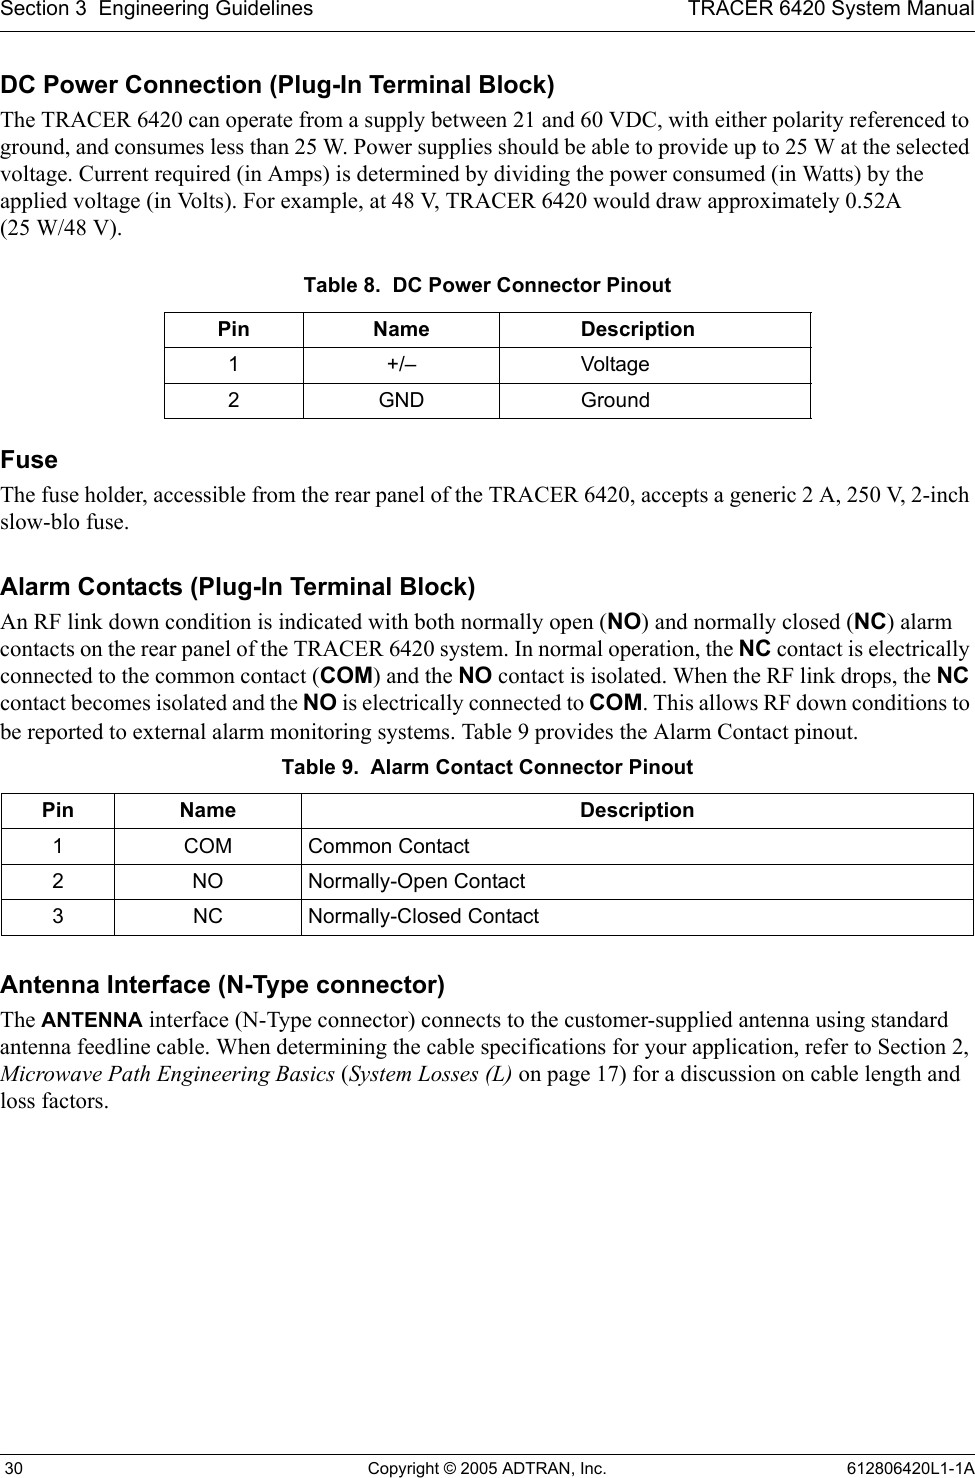 Section 3  Engineering Guidelines TRACER 6420 System Manual 30 Copyright © 2005 ADTRAN, Inc. 612806420L1-1ADC Power Connection (Plug-In Terminal Block)The TRACER 6420 can operate from a supply between 21 and 60 VDC, with either polarity referenced to ground, and consumes less than 25 W. Power supplies should be able to provide up to 25 W at the selected voltage. Current required (in Amps) is determined by dividing the power consumed (in Watts) by the applied voltage (in Volts). For example, at 48 V, TRACER 6420 would draw approximately 0.52A  (25 W/48 V).FuseThe fuse holder, accessible from the rear panel of the TRACER 6420, accepts a generic 2 A, 250 V, 2-inch slow-blo fuse.Alarm Contacts (Plug-In Terminal Block)An RF link down condition is indicated with both normally open (NO) and normally closed (NC) alarm contacts on the rear panel of the TRACER 6420 system. In normal operation, the NC contact is electrically connected to the common contact (COM) and the NO contact is isolated. When the RF link drops, the NC contact becomes isolated and the NO is electrically connected to COM. This allows RF down conditions to be reported to external alarm monitoring systems. Table 9 provides the Alarm Contact pinout.Antenna Interface (N-Type connector)The ANTENNA interface (N-Type connector) connects to the customer-supplied antenna using standard antenna feedline cable. When determining the cable specifications for your application, refer to Section 2, Microwave Path Engineering Basics (System Losses (L) on page 17) for a discussion on cable length and loss factors.Table 8.  DC Power Connector Pinout Pin Name Description1+/– Voltage2GND GroundTable 9.  Alarm Contact Connector Pinout Pin Name Description1 COM Common Contact2 NO Normally-Open Contact3 NC Normally-Closed Contact